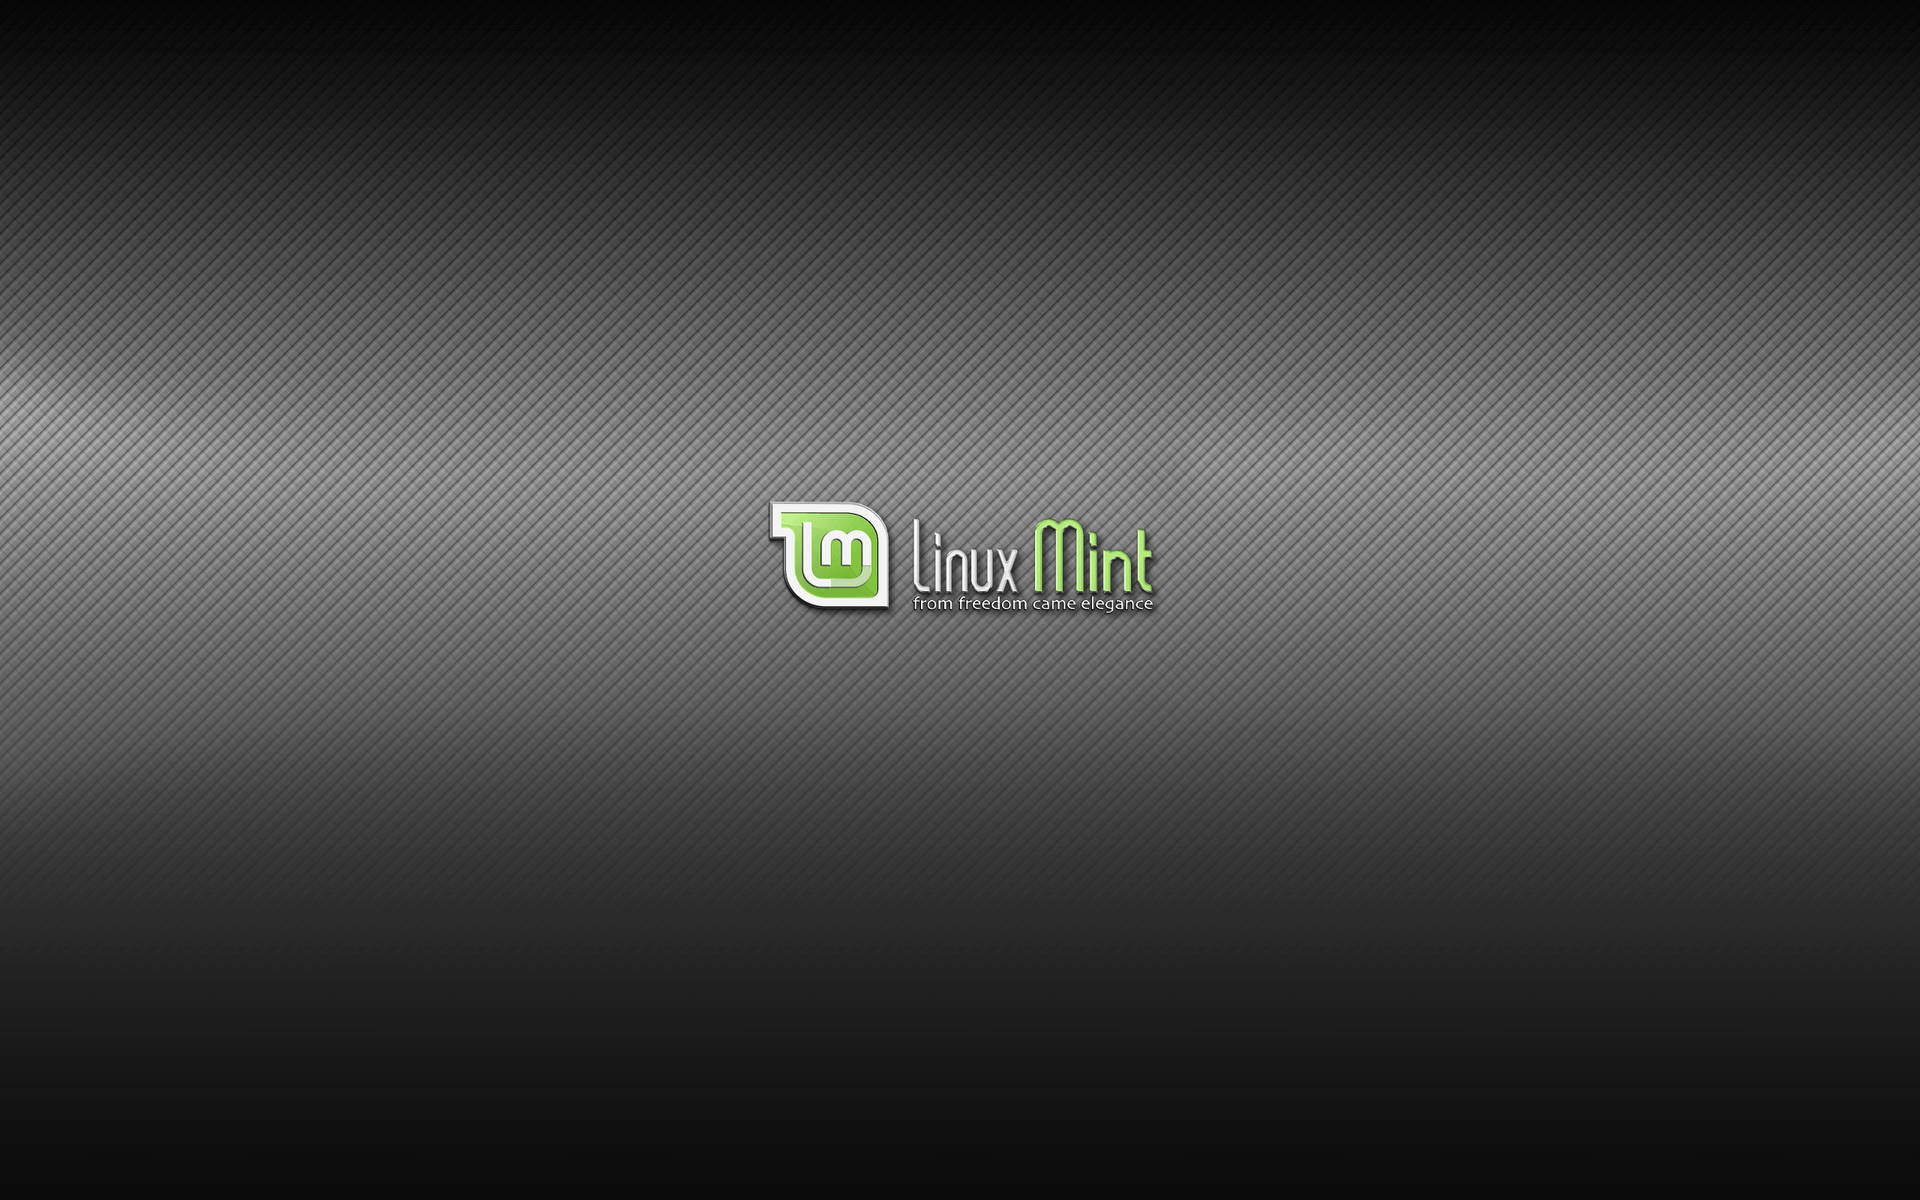 Operating System Linux Mint Logo Textured Backdrop